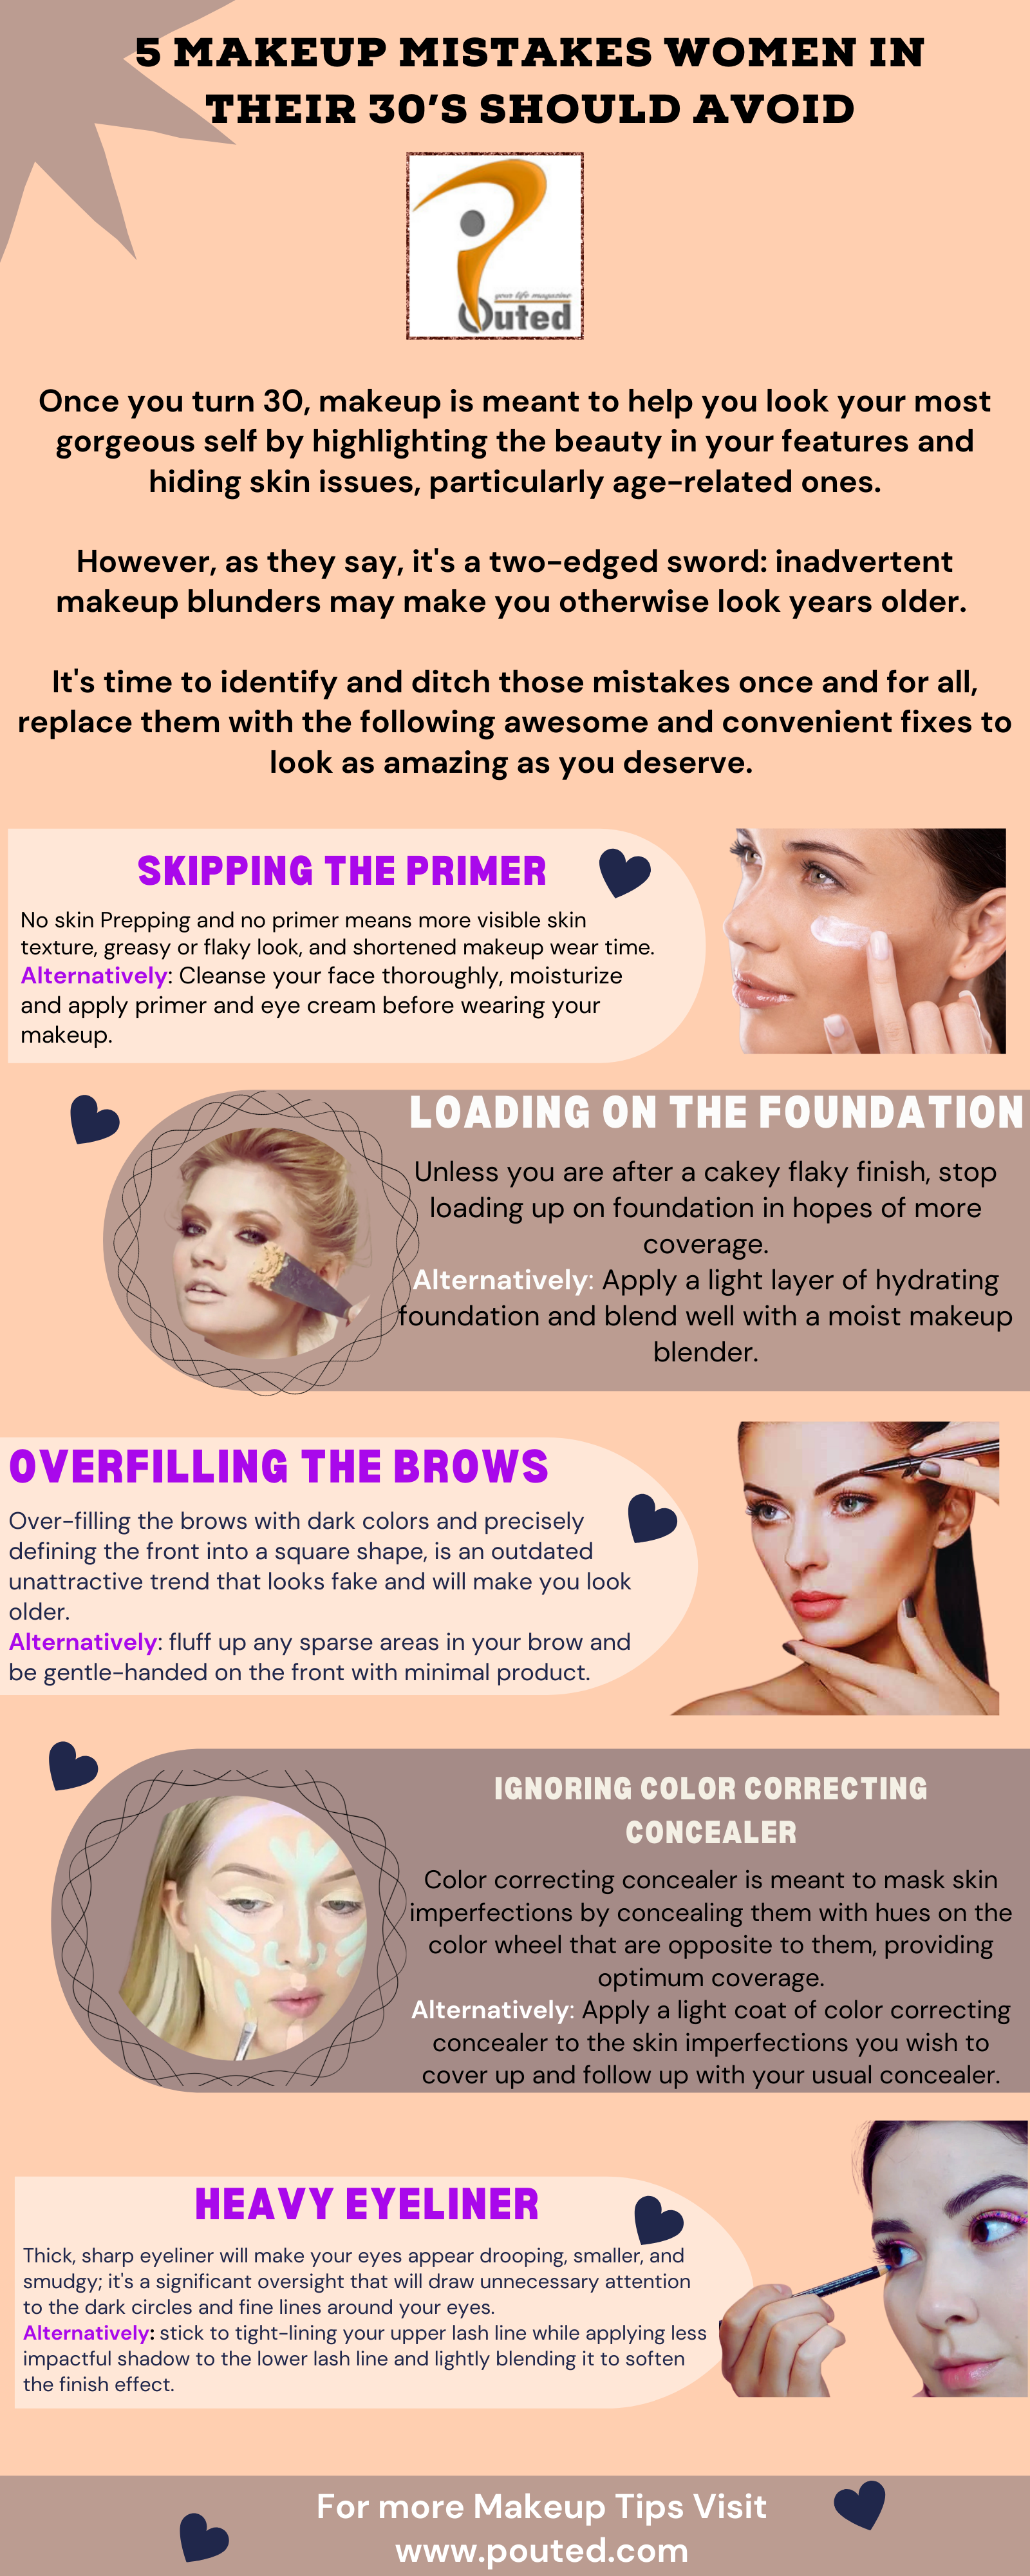 5-Makeup-mistakes-women-in-their-30s-should-avoid 5 Makeup mistakes women in their 30's should avoid